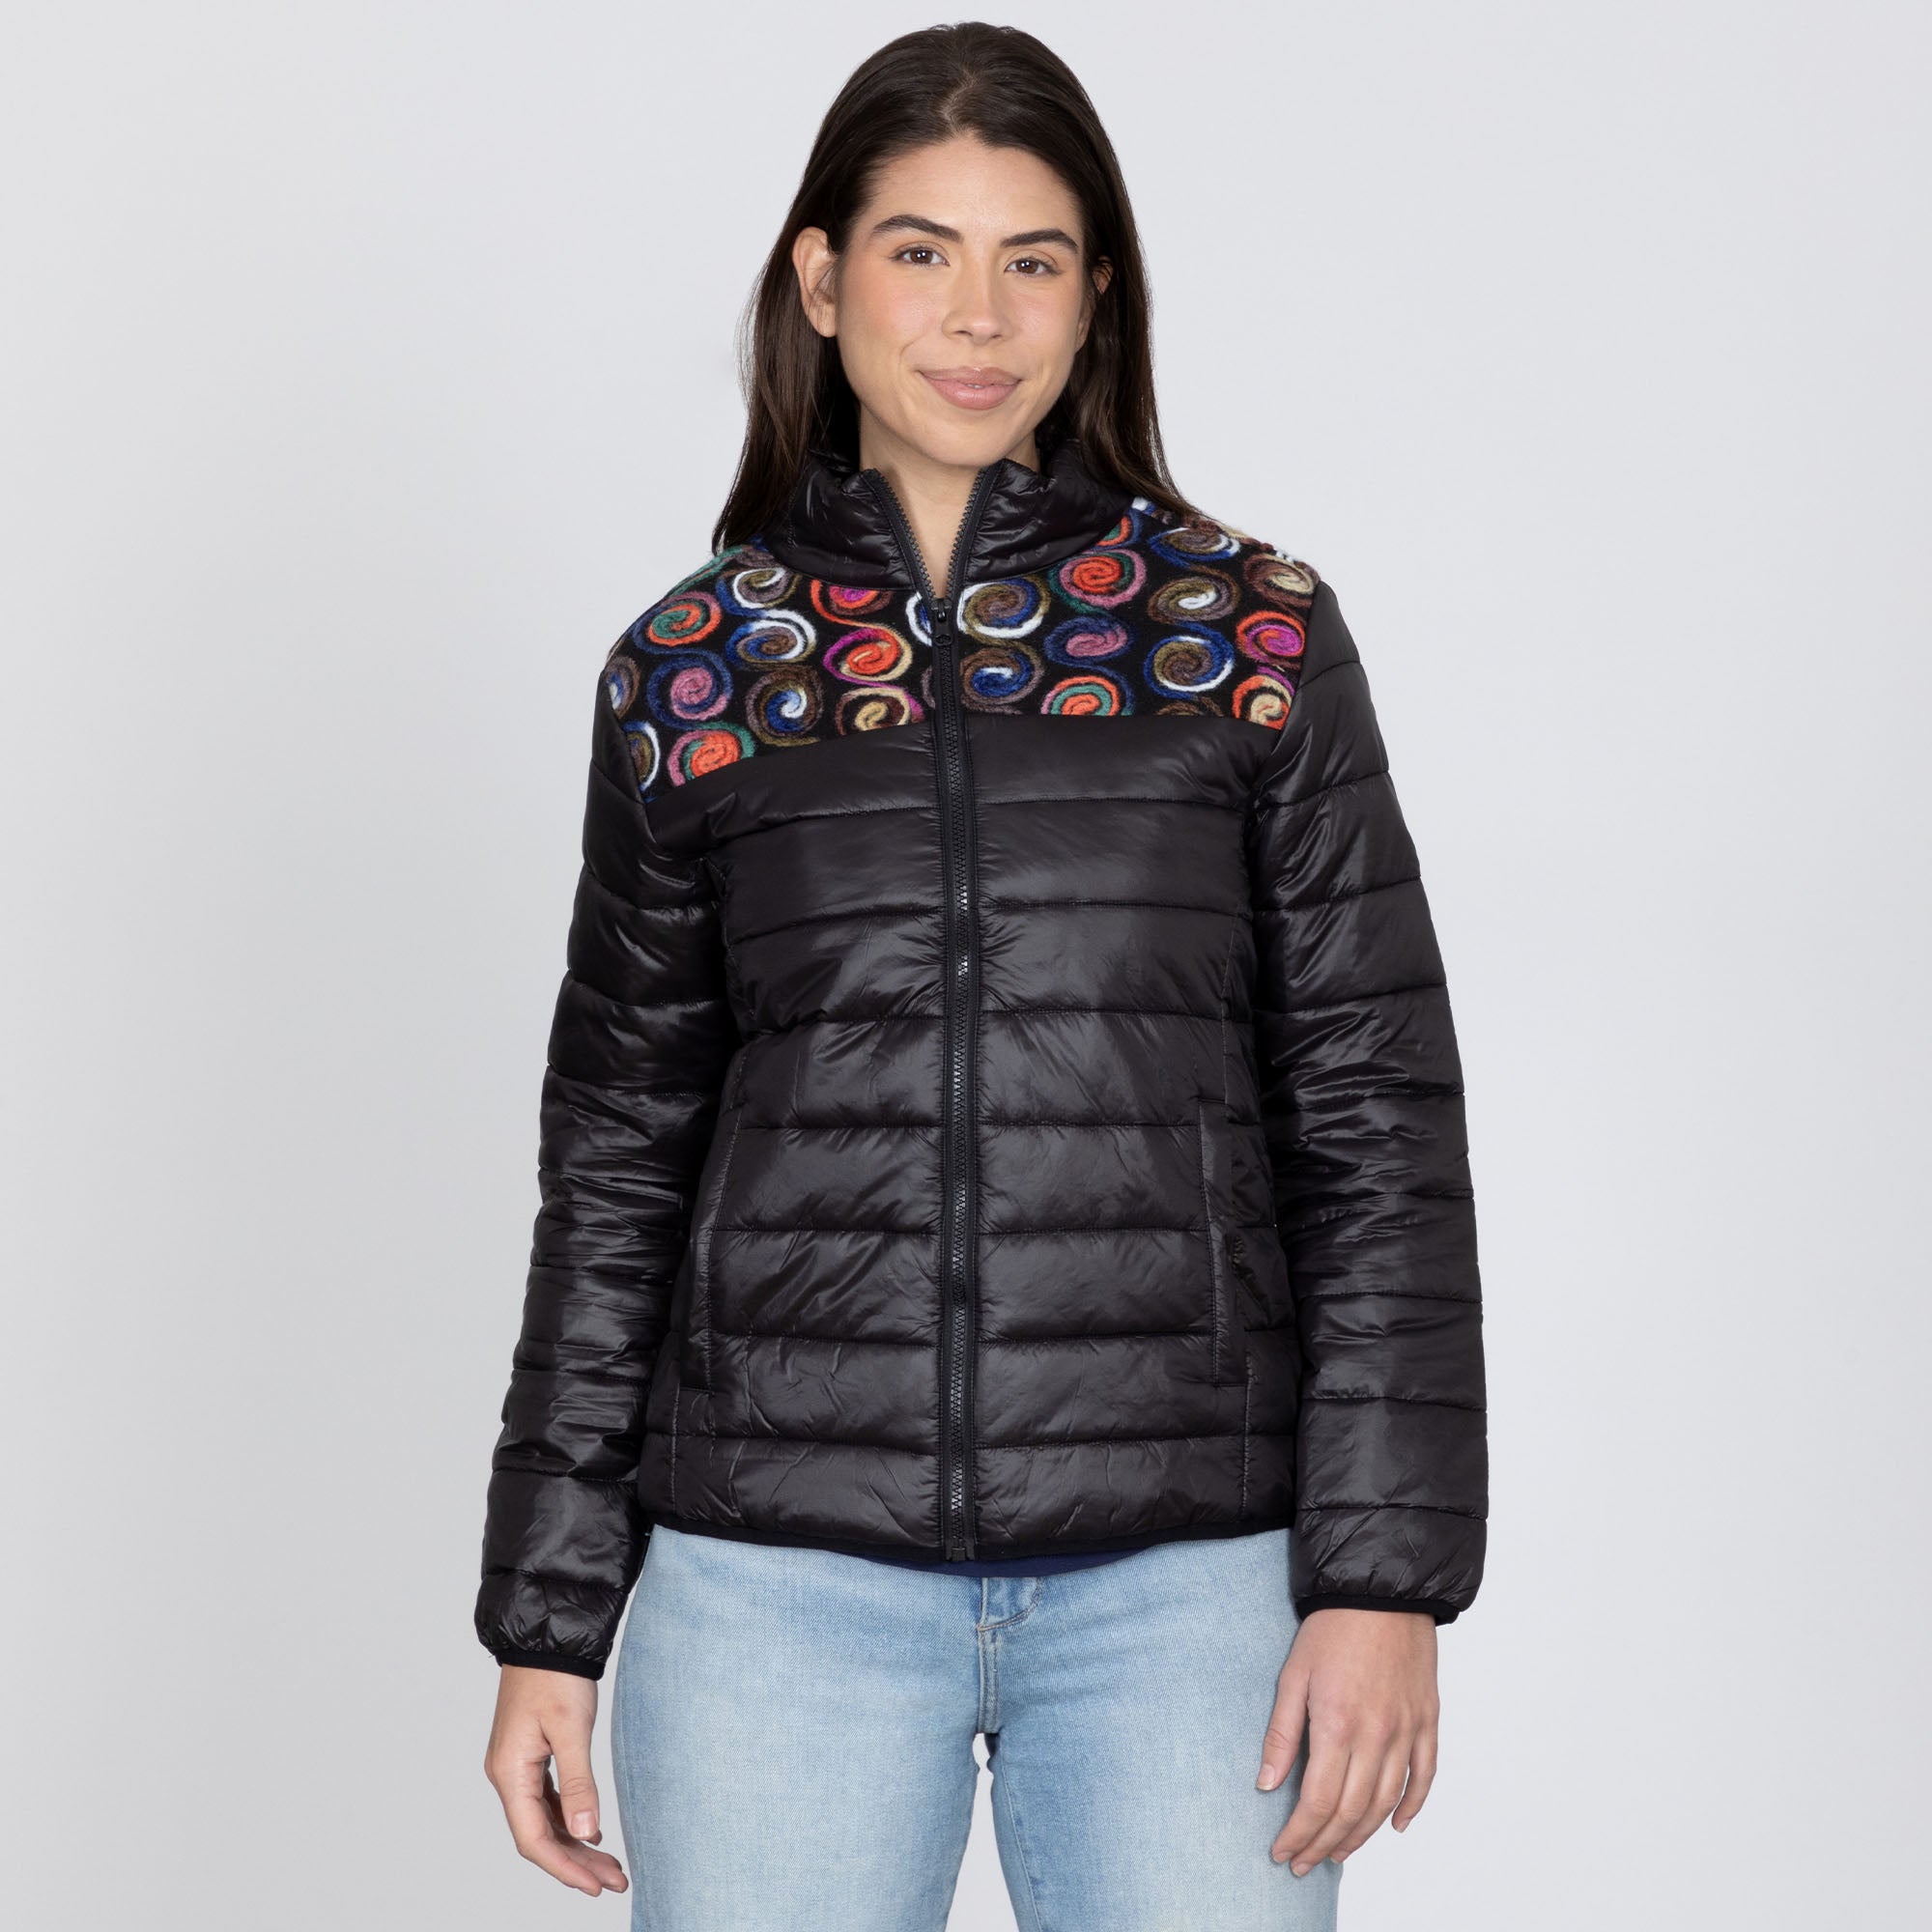 Mixed Fabric Embroidery Insulated Jacket - XL